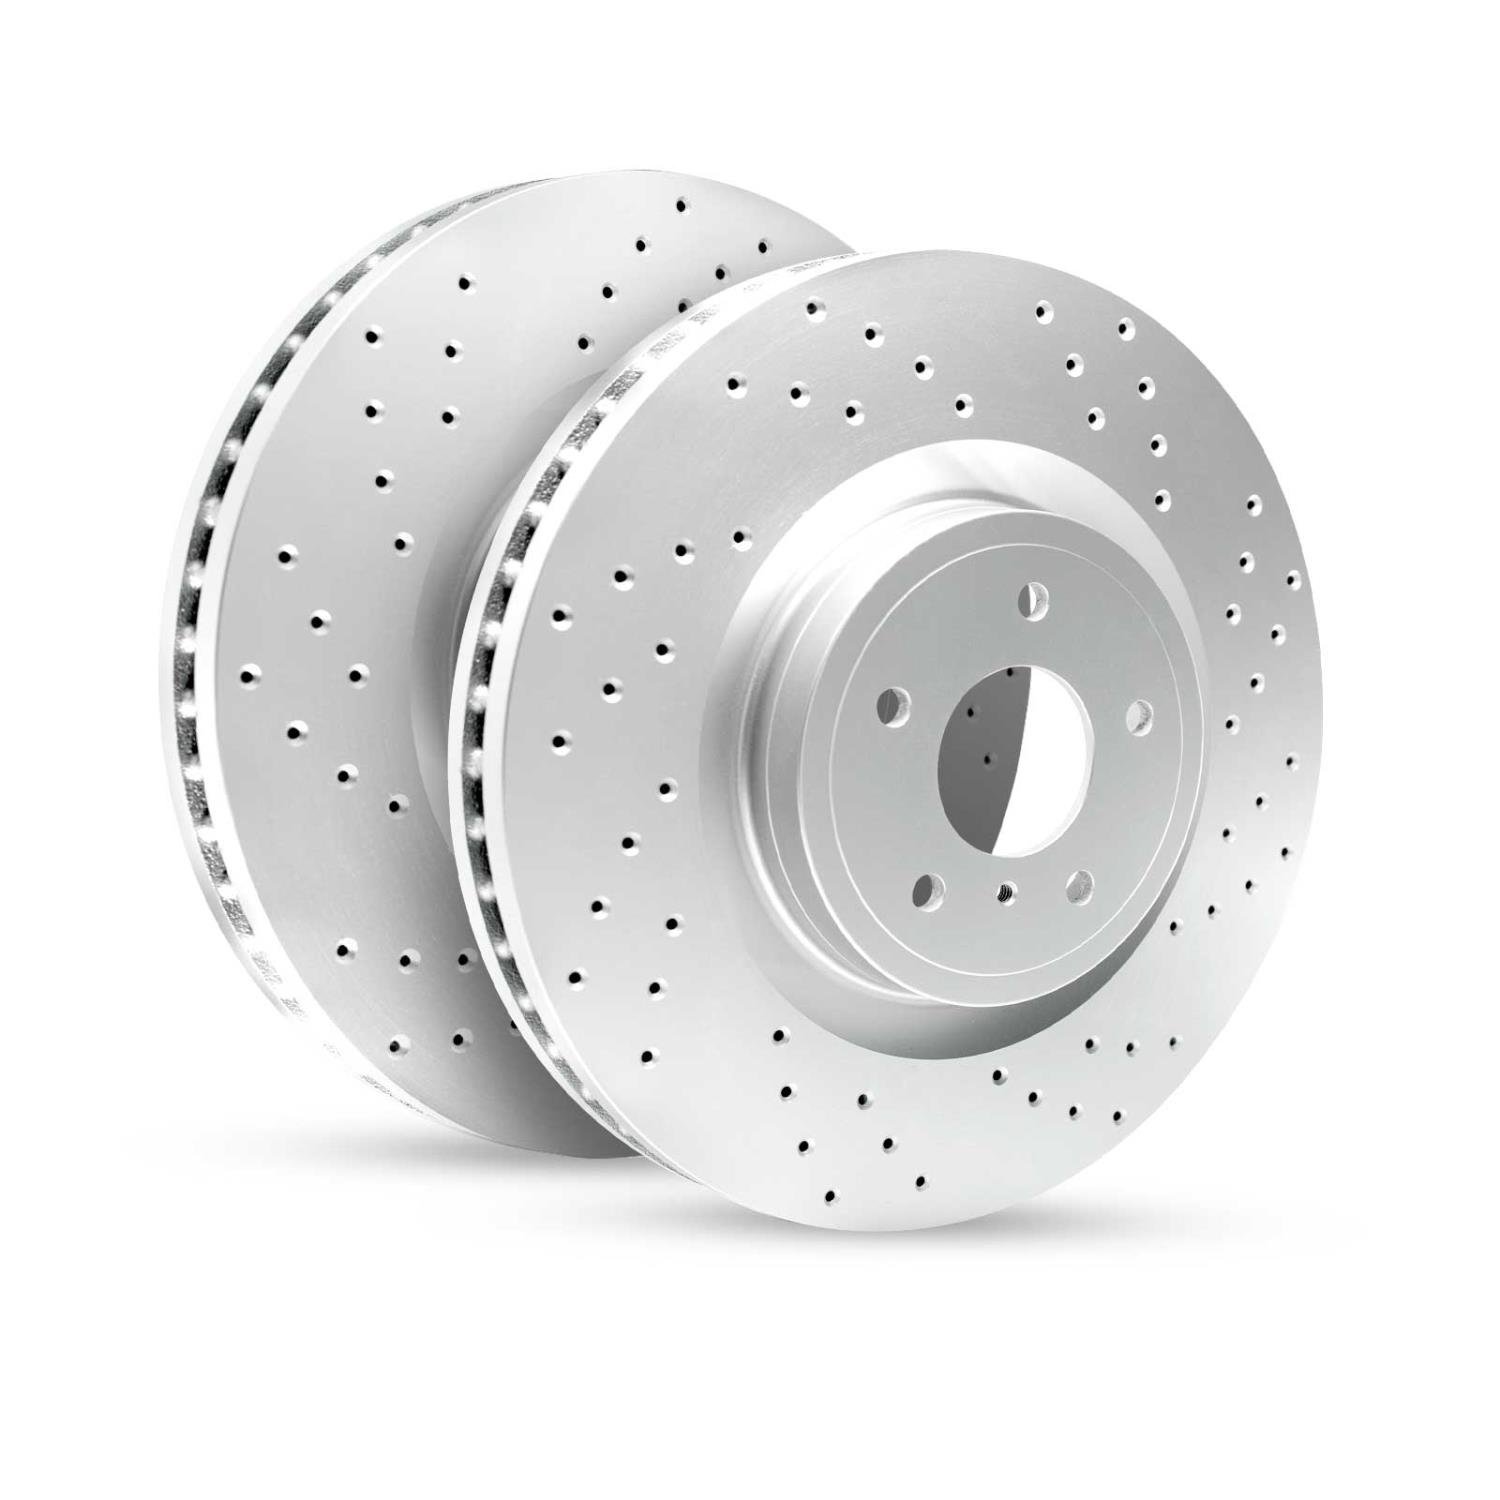 GEO-Carbon Drilled/Slotted Rotors, 2012-2018 Fits Multiple